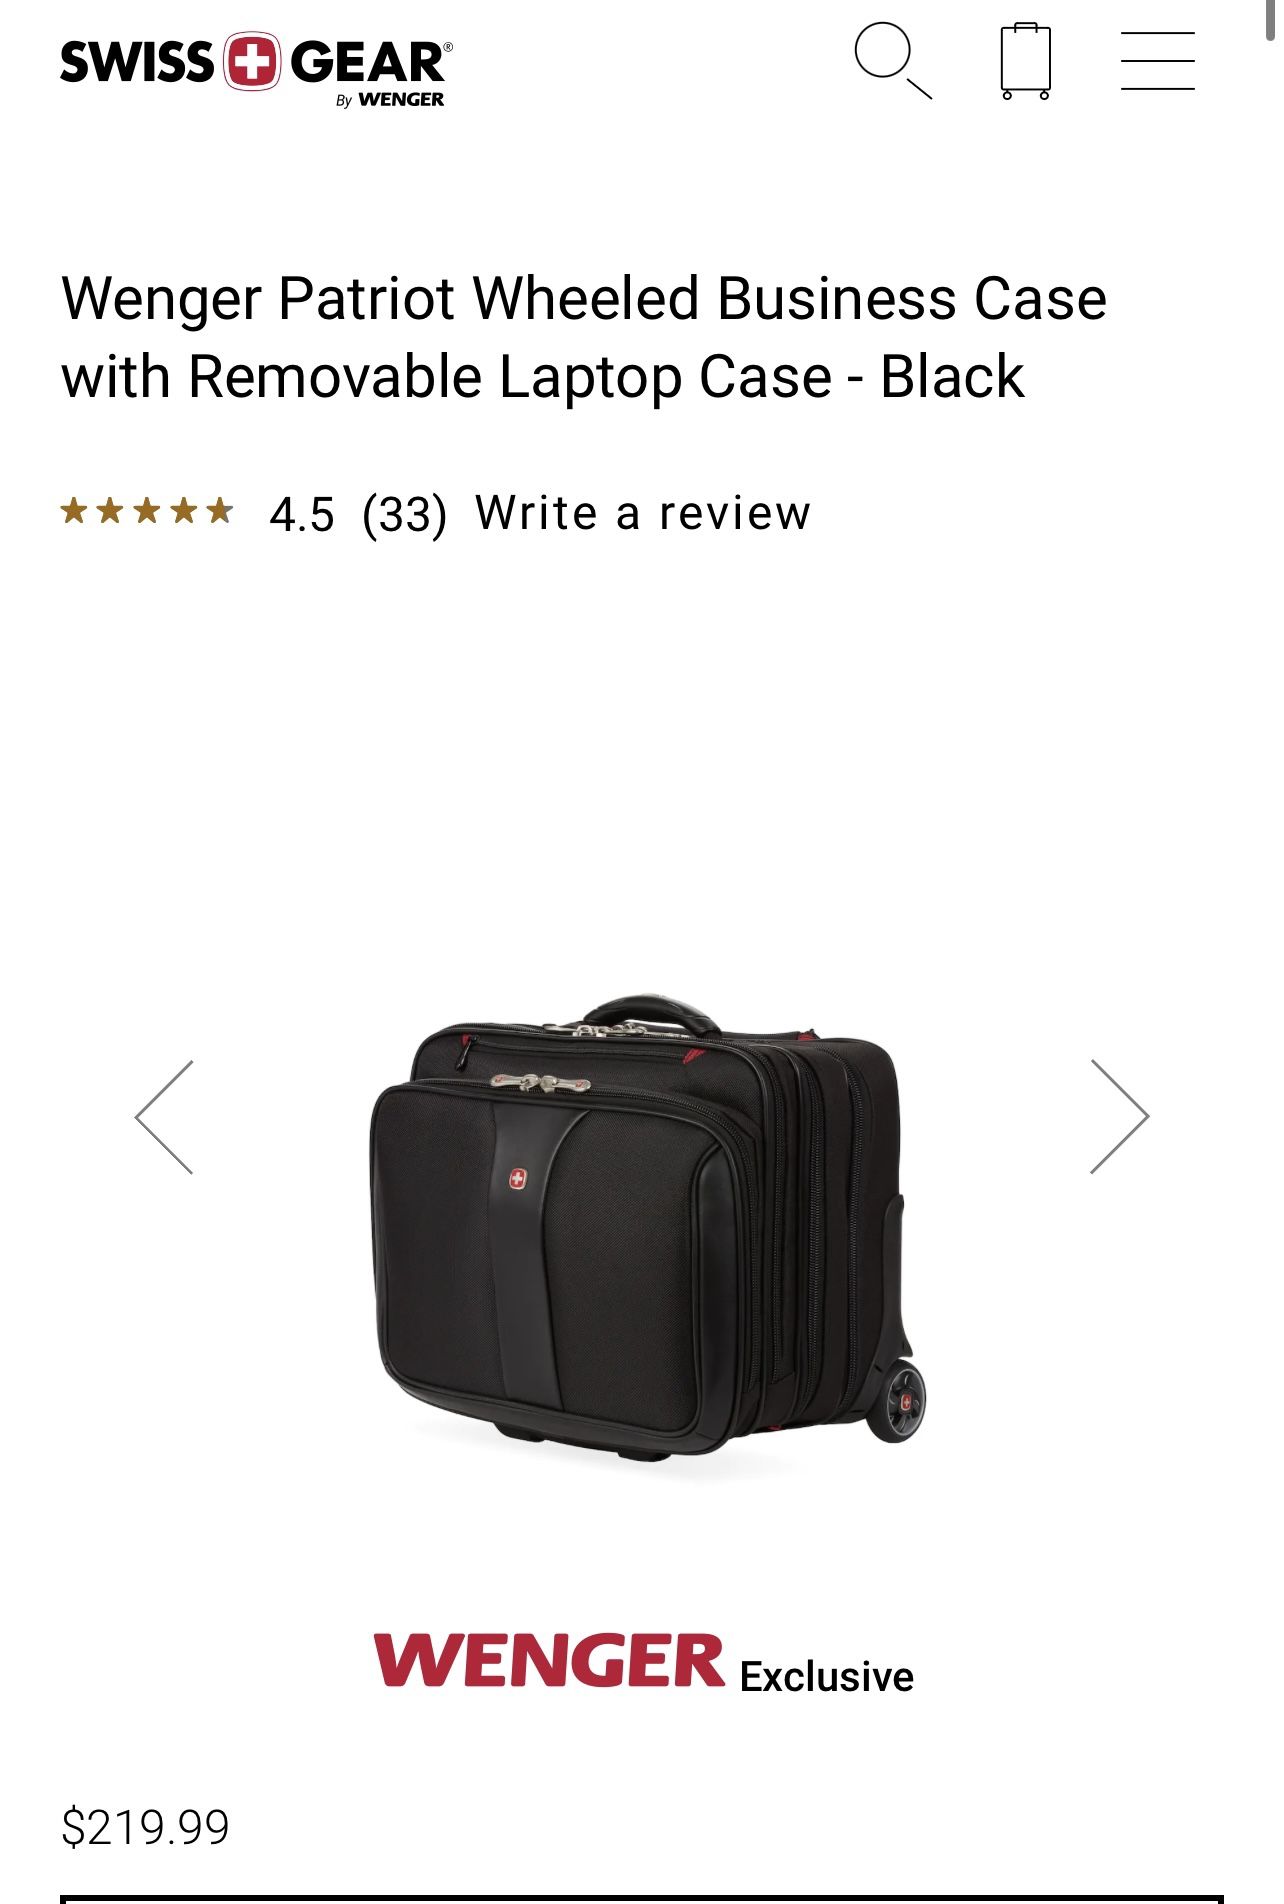 Wenger Patriot Wheeled Business Case with Removable Laptop Case - Black